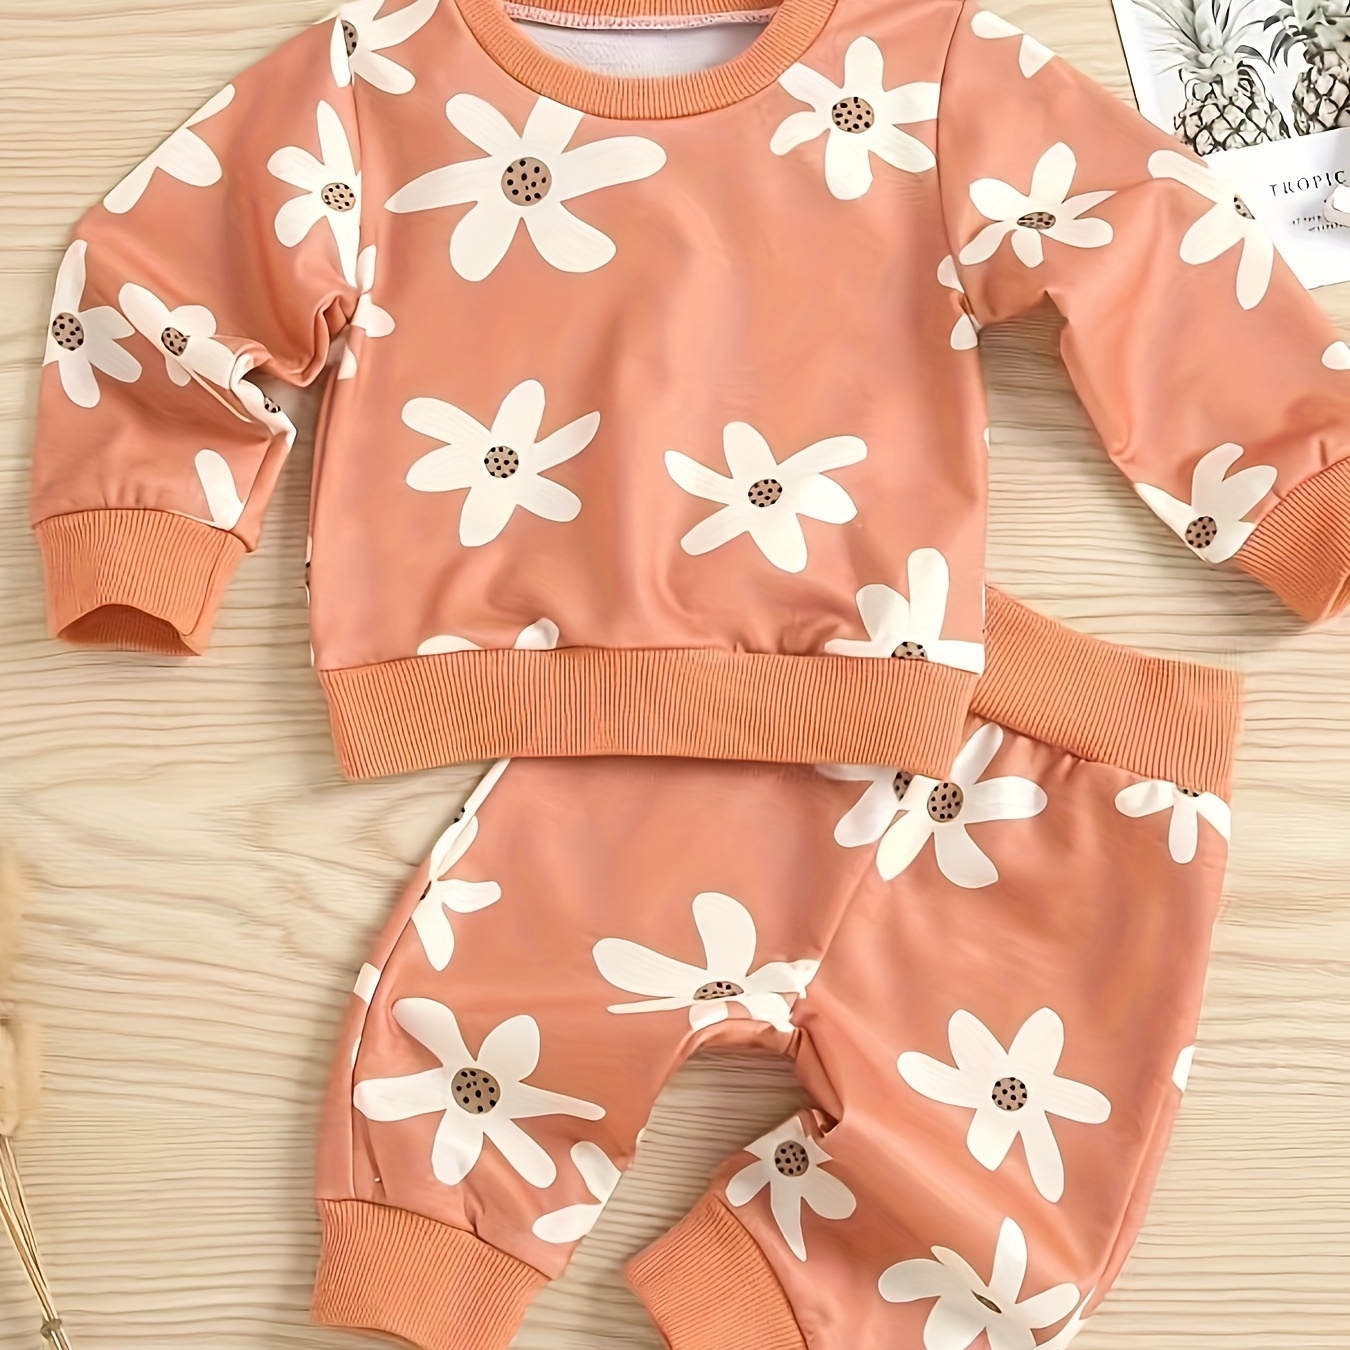 

Toddler Chrysanthemum Print Ribbed Cuff Long Sleeve Top Pants Set, Baby's Casual Outfits